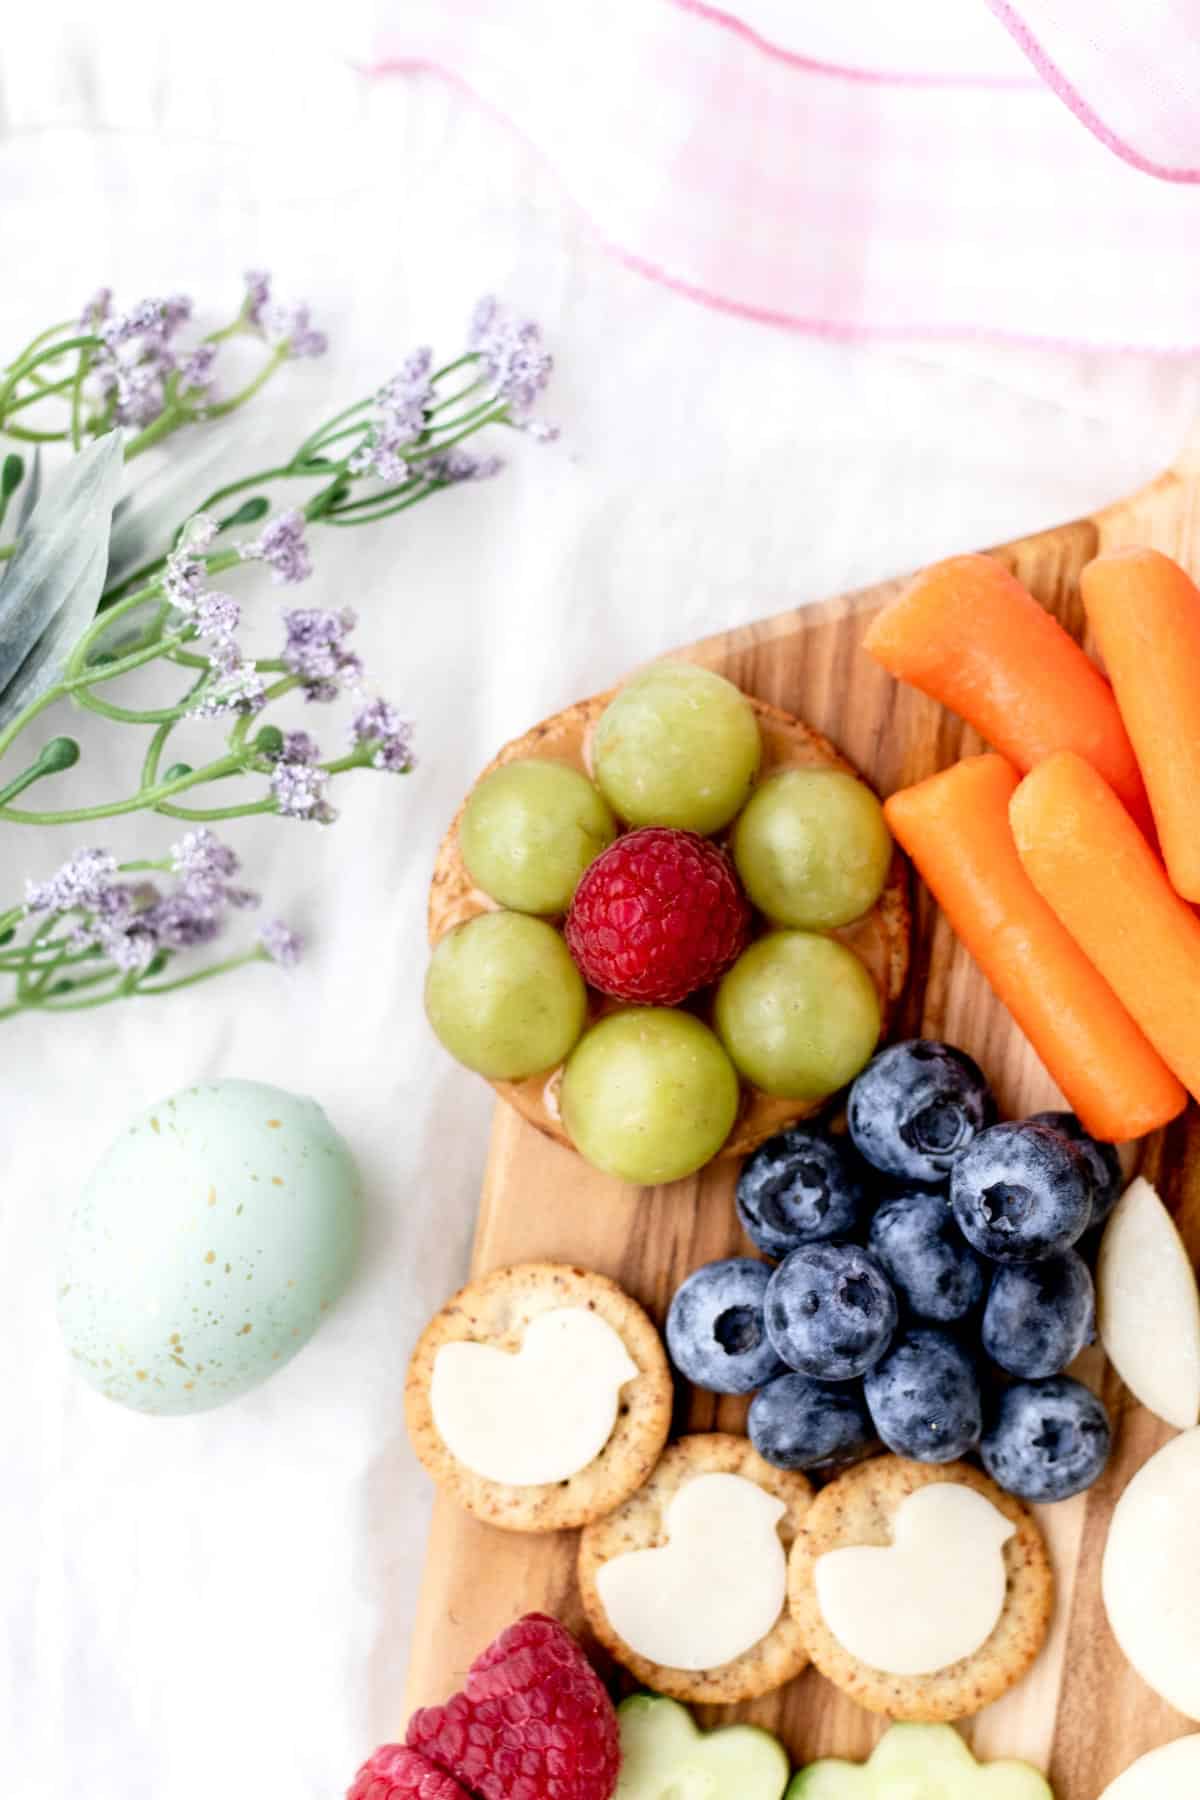 A close-up of the side of an Easter bunny board, showcasing the grape nests, carrots, and blueberries.